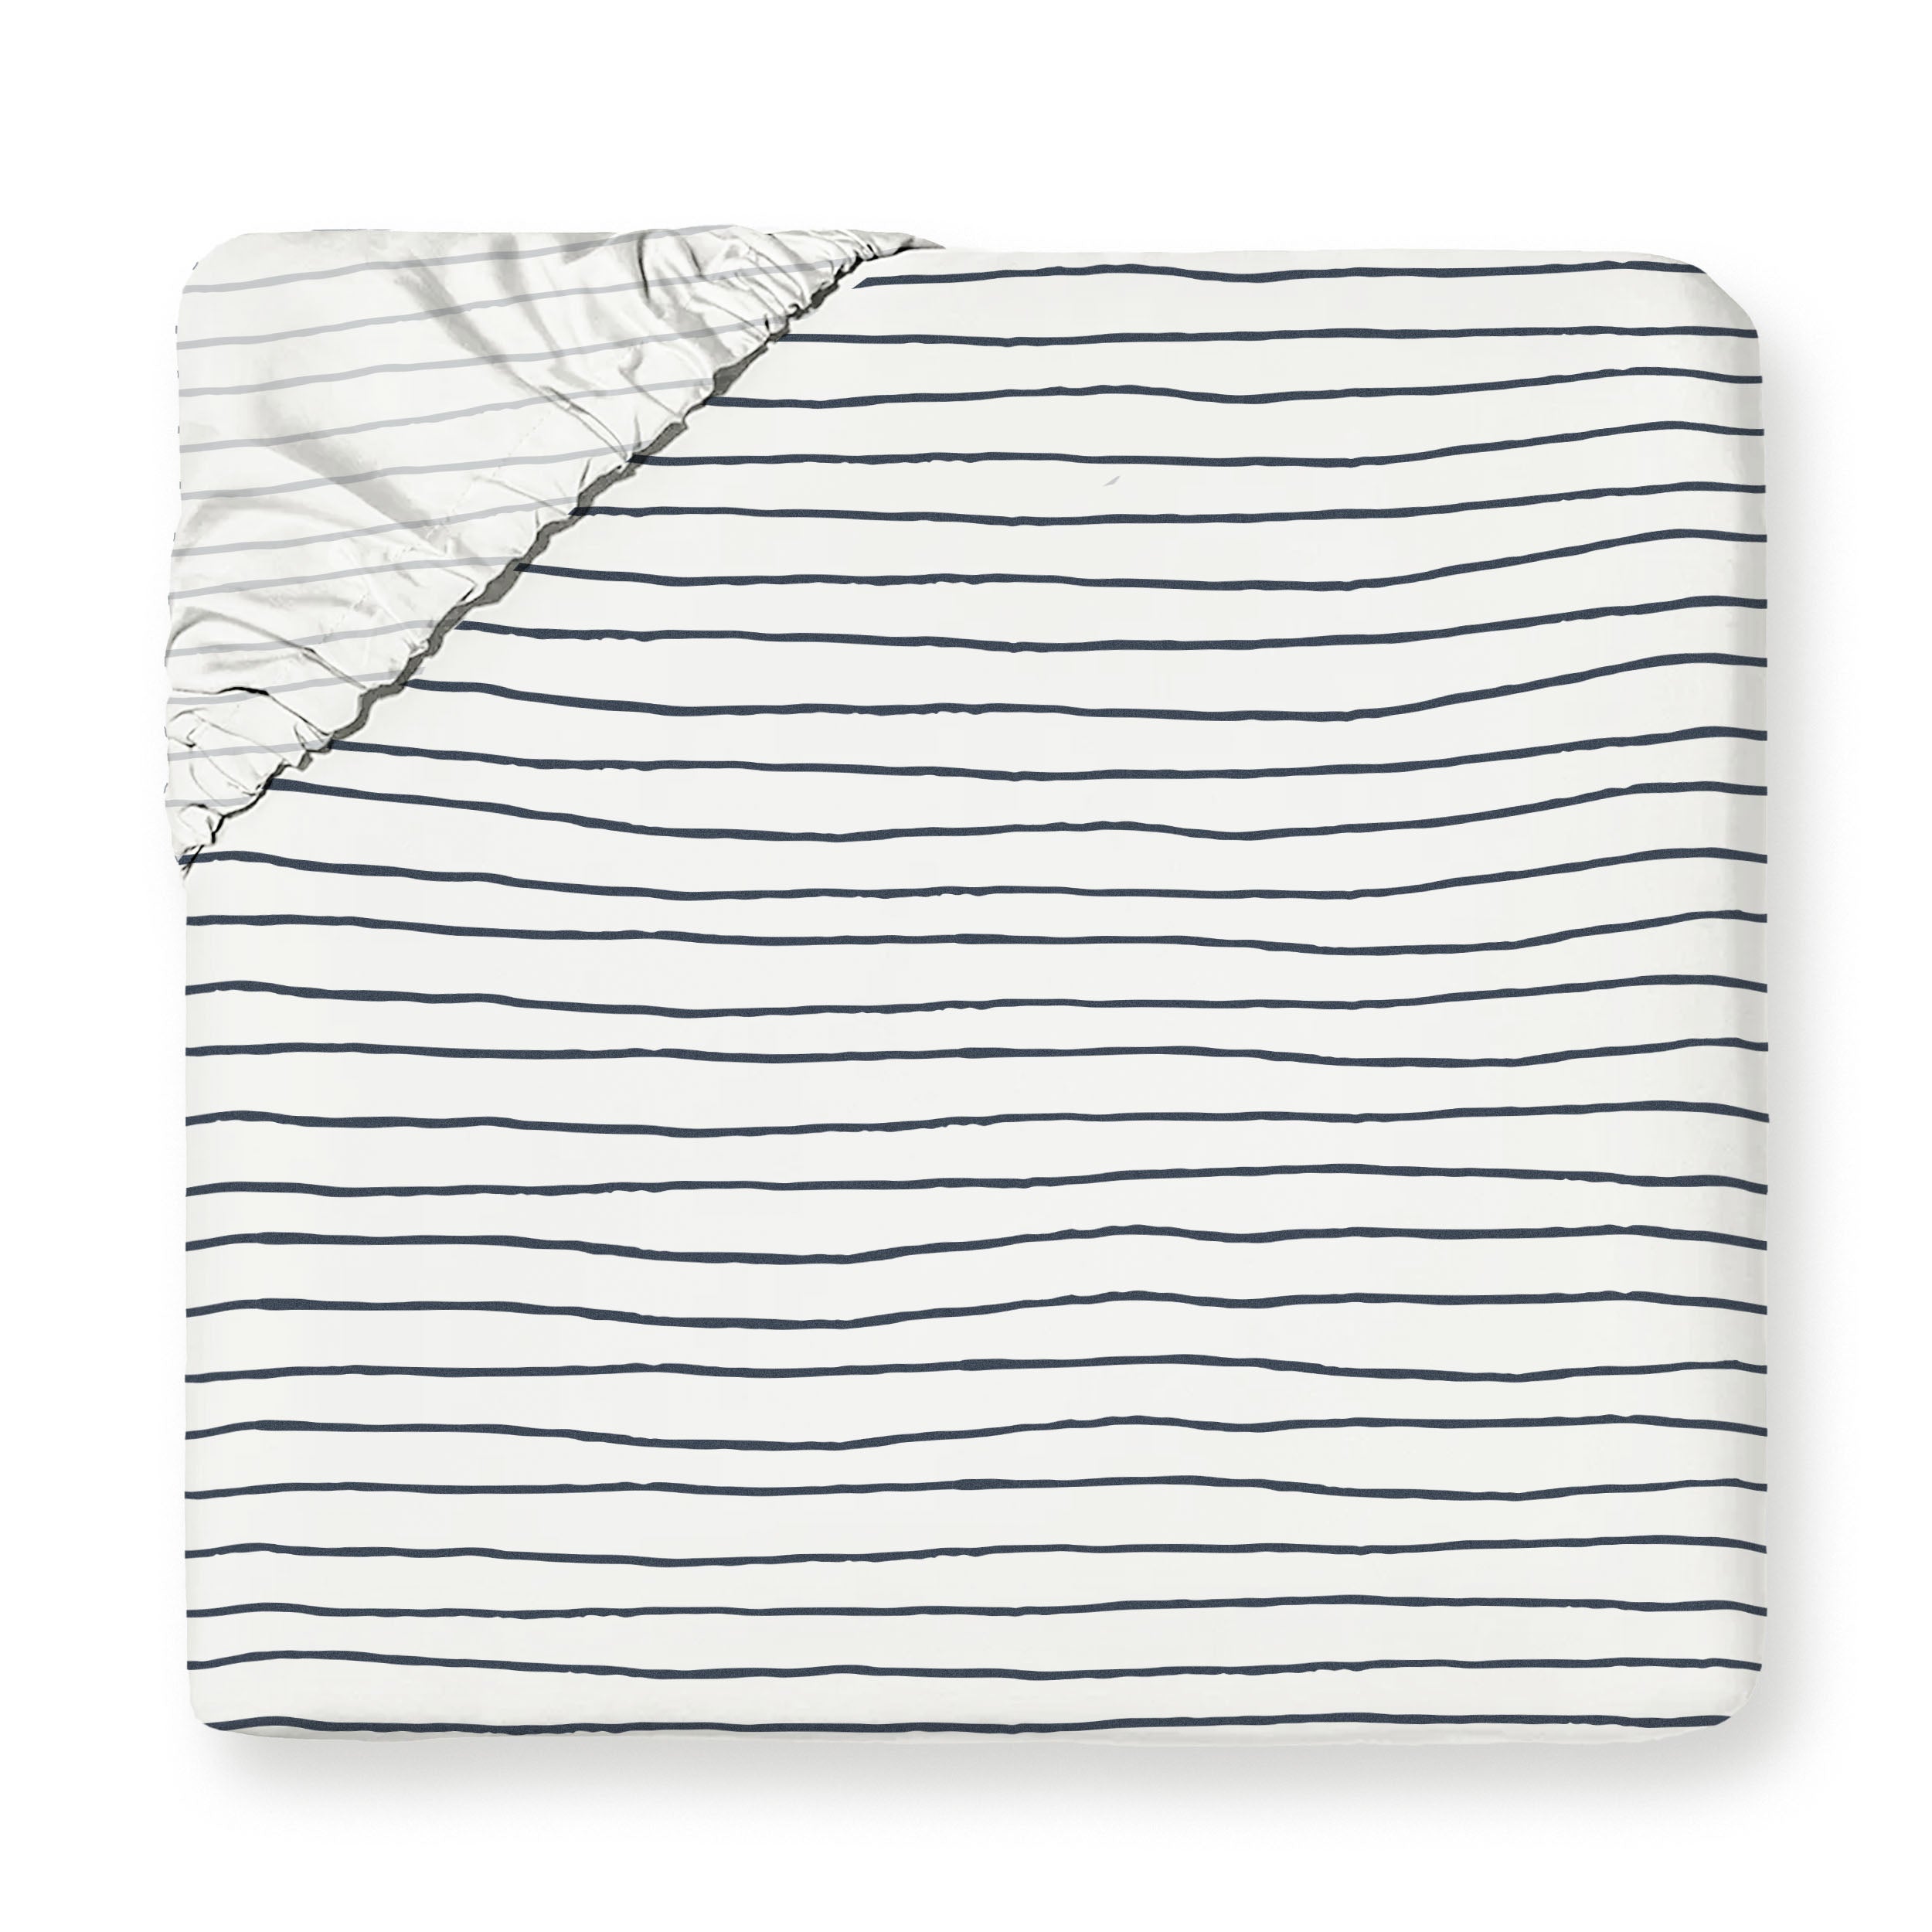 A top view of a neatly folded Organic Cotton Fitted Sheet Set - Navy Stripes from Makemake Organics, with black horizontal stripes on a white background, with one corner slightly unfolded showing the inside.